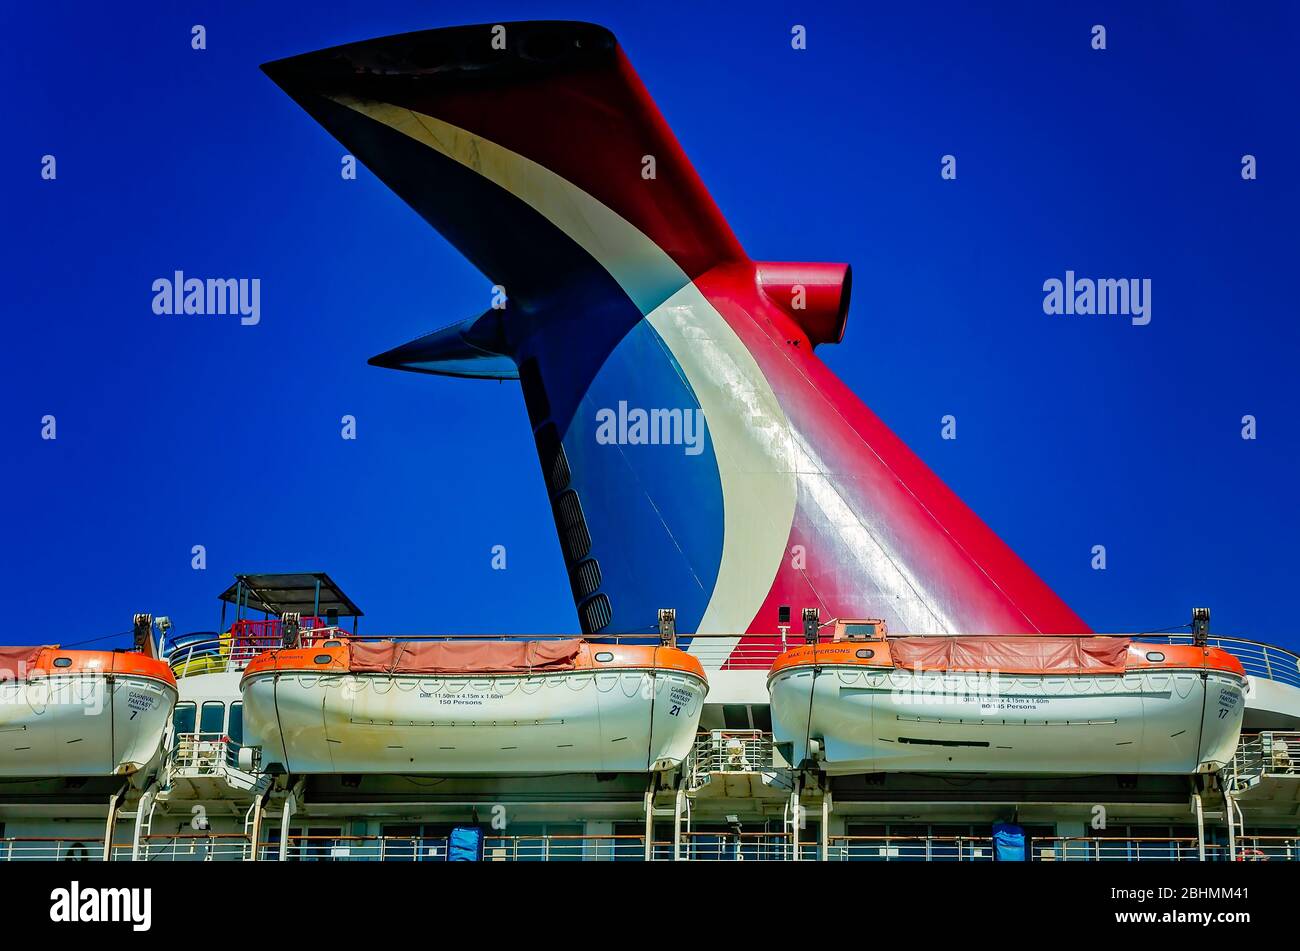 The Carnival Fantasy cruise ship’s whale tail funnel and lifeboats are pictured at the Alabama Cruise Terminal,  April 24, 2020, in Mobile, Alabama. Stock Photo